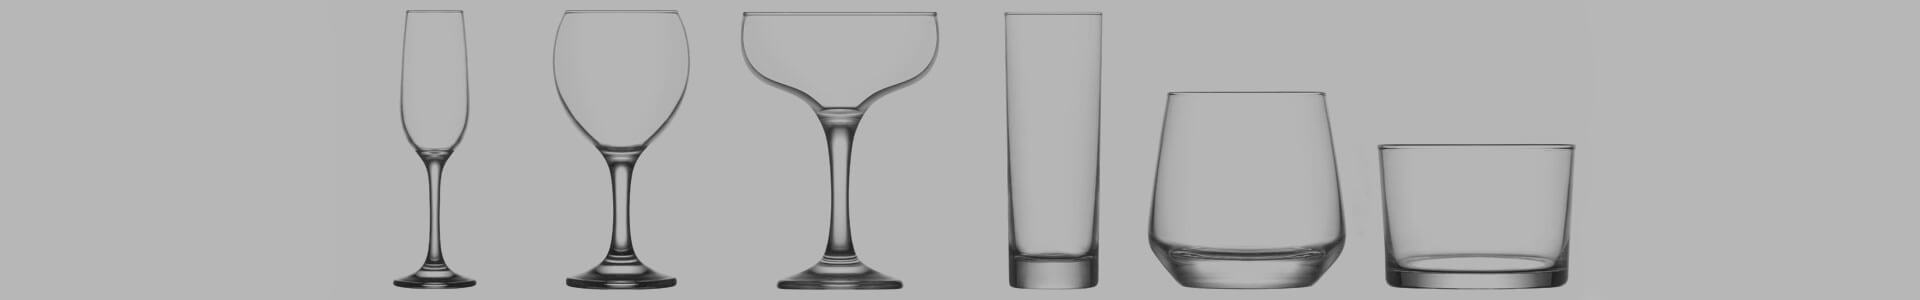 Six different cocktail glasses and beakers by manufacturer LAV are standing next to each other.